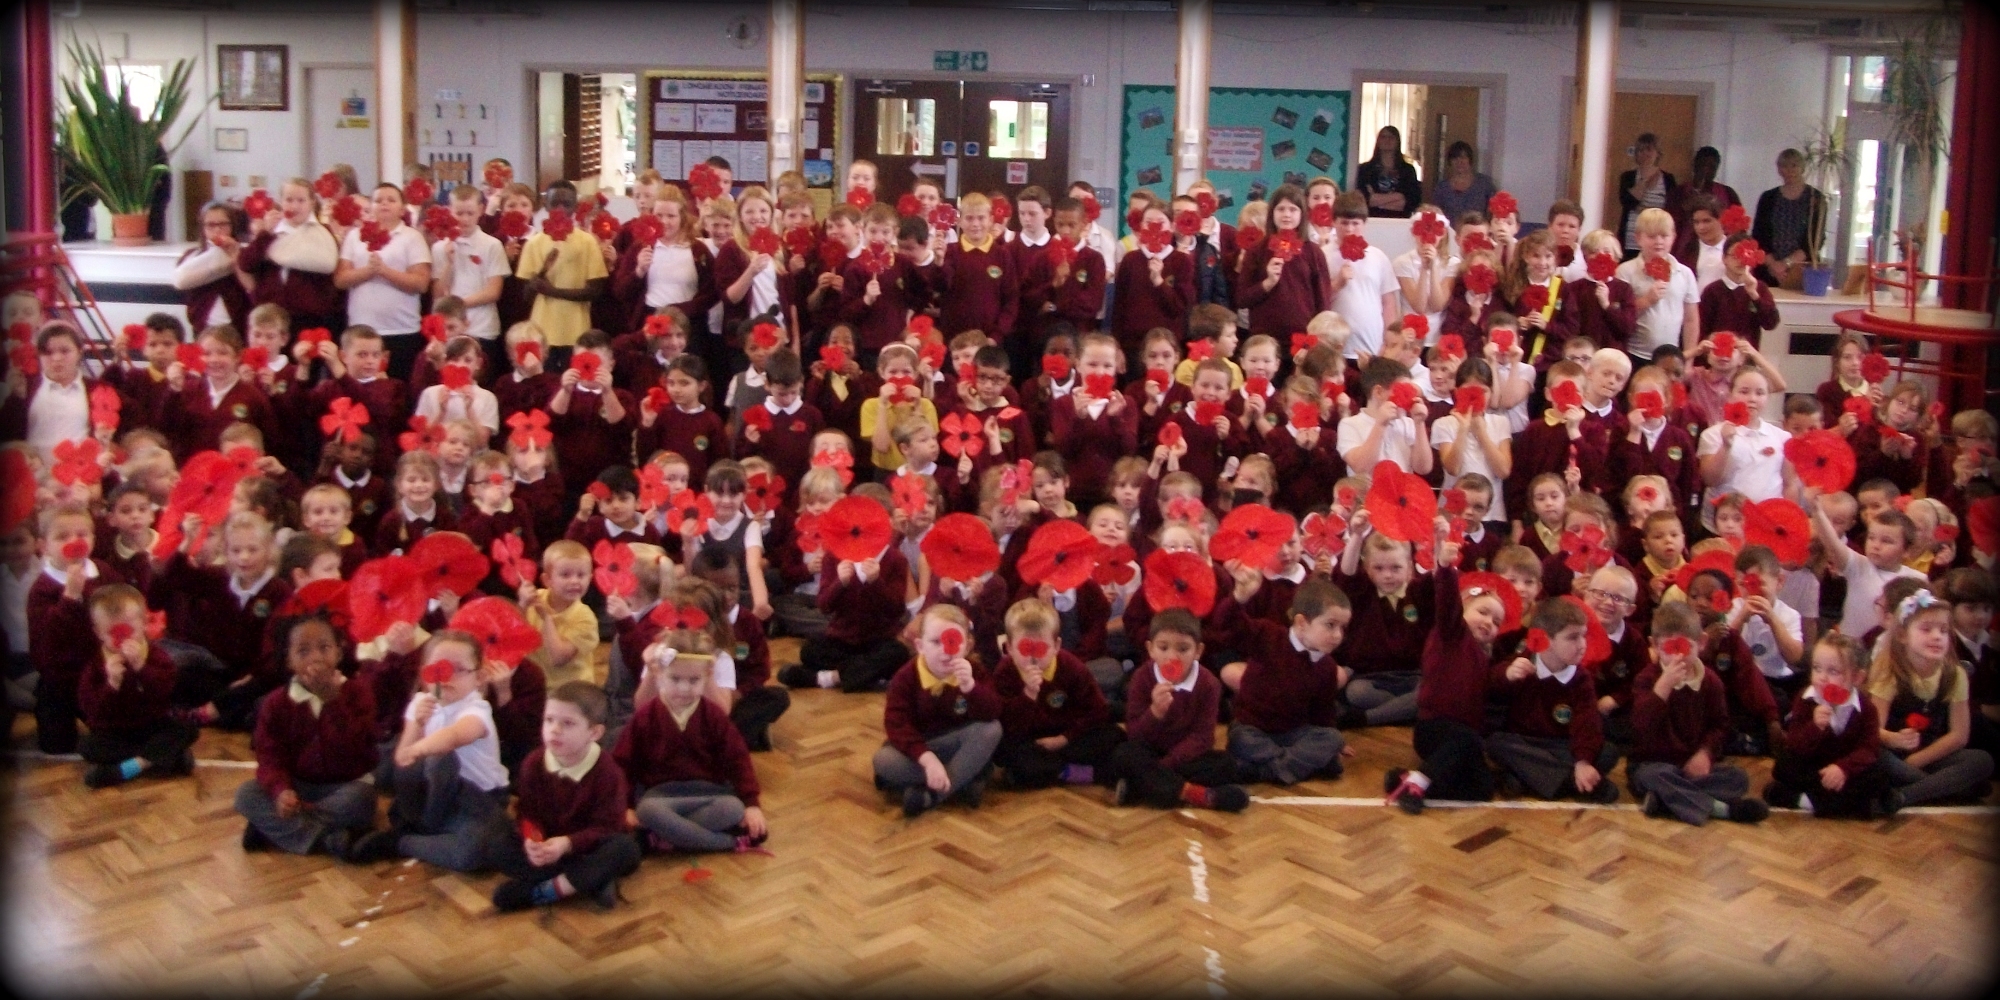 Whole school photo holding hand-made poppies.